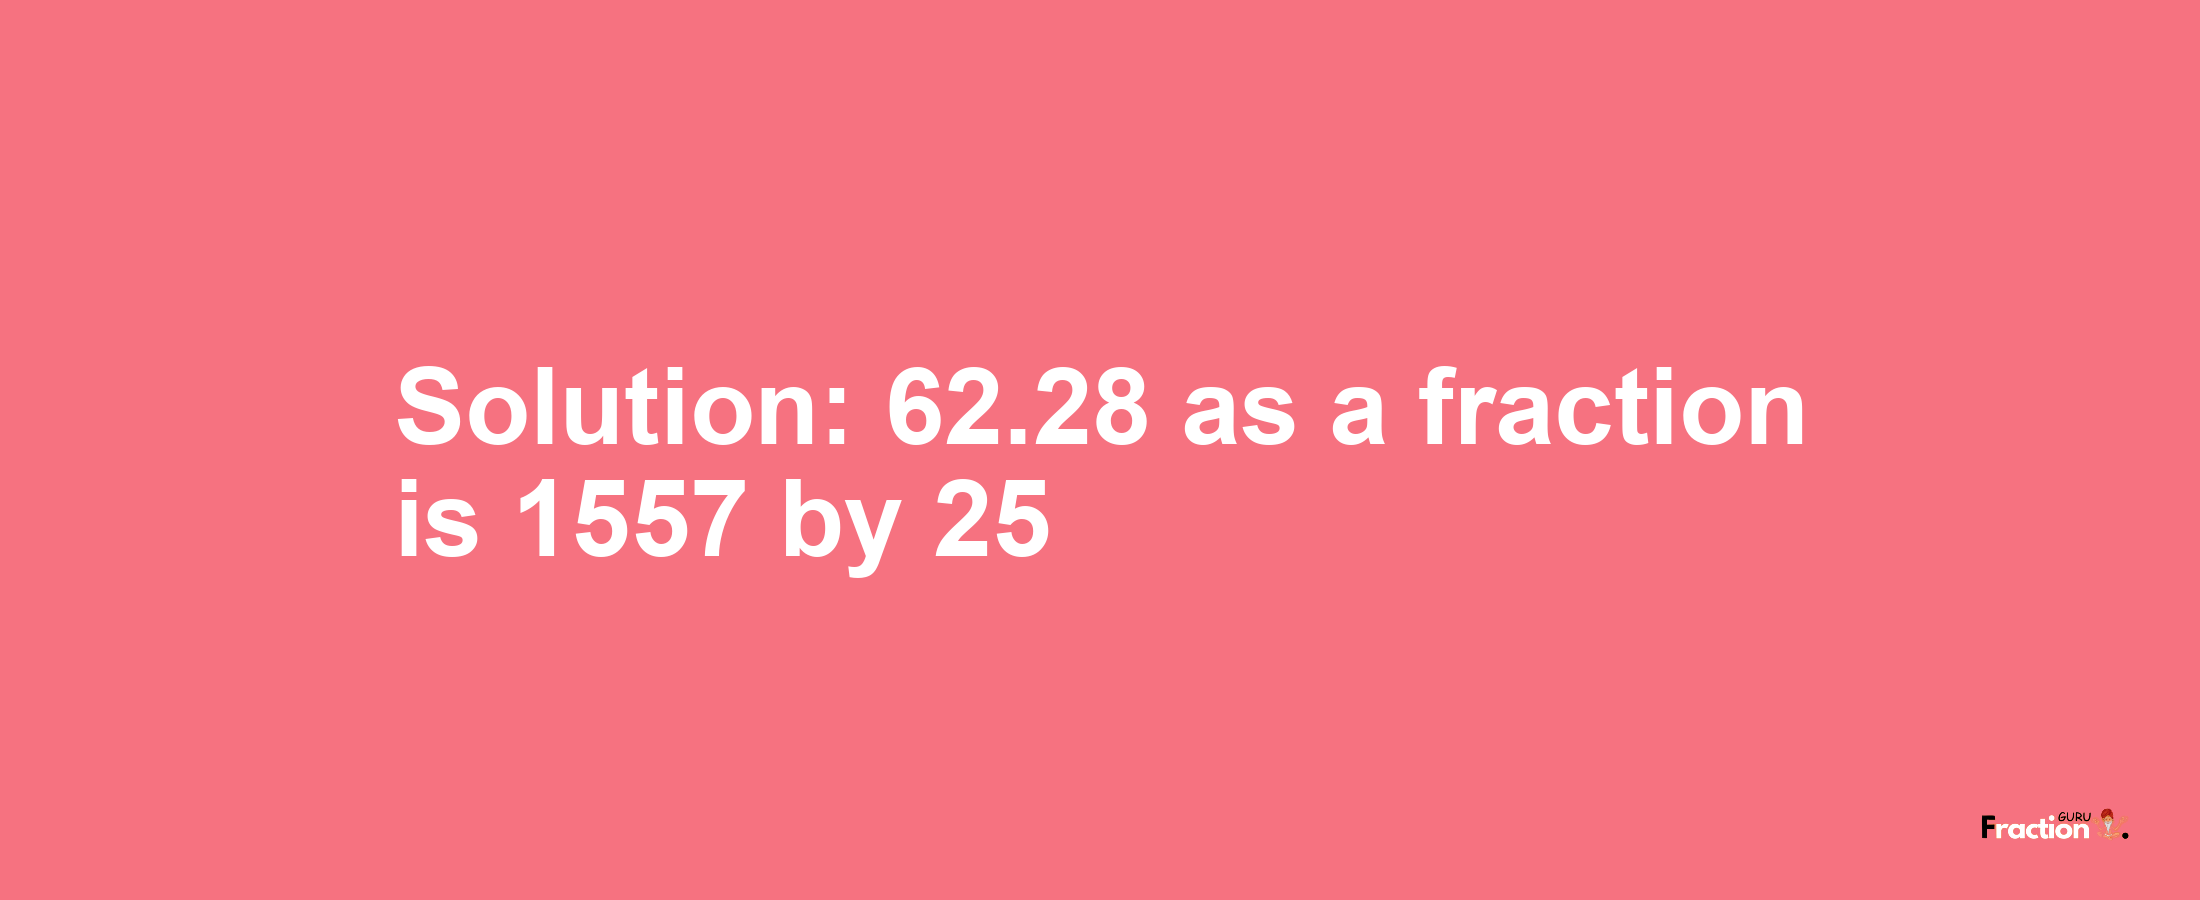 Solution:62.28 as a fraction is 1557/25